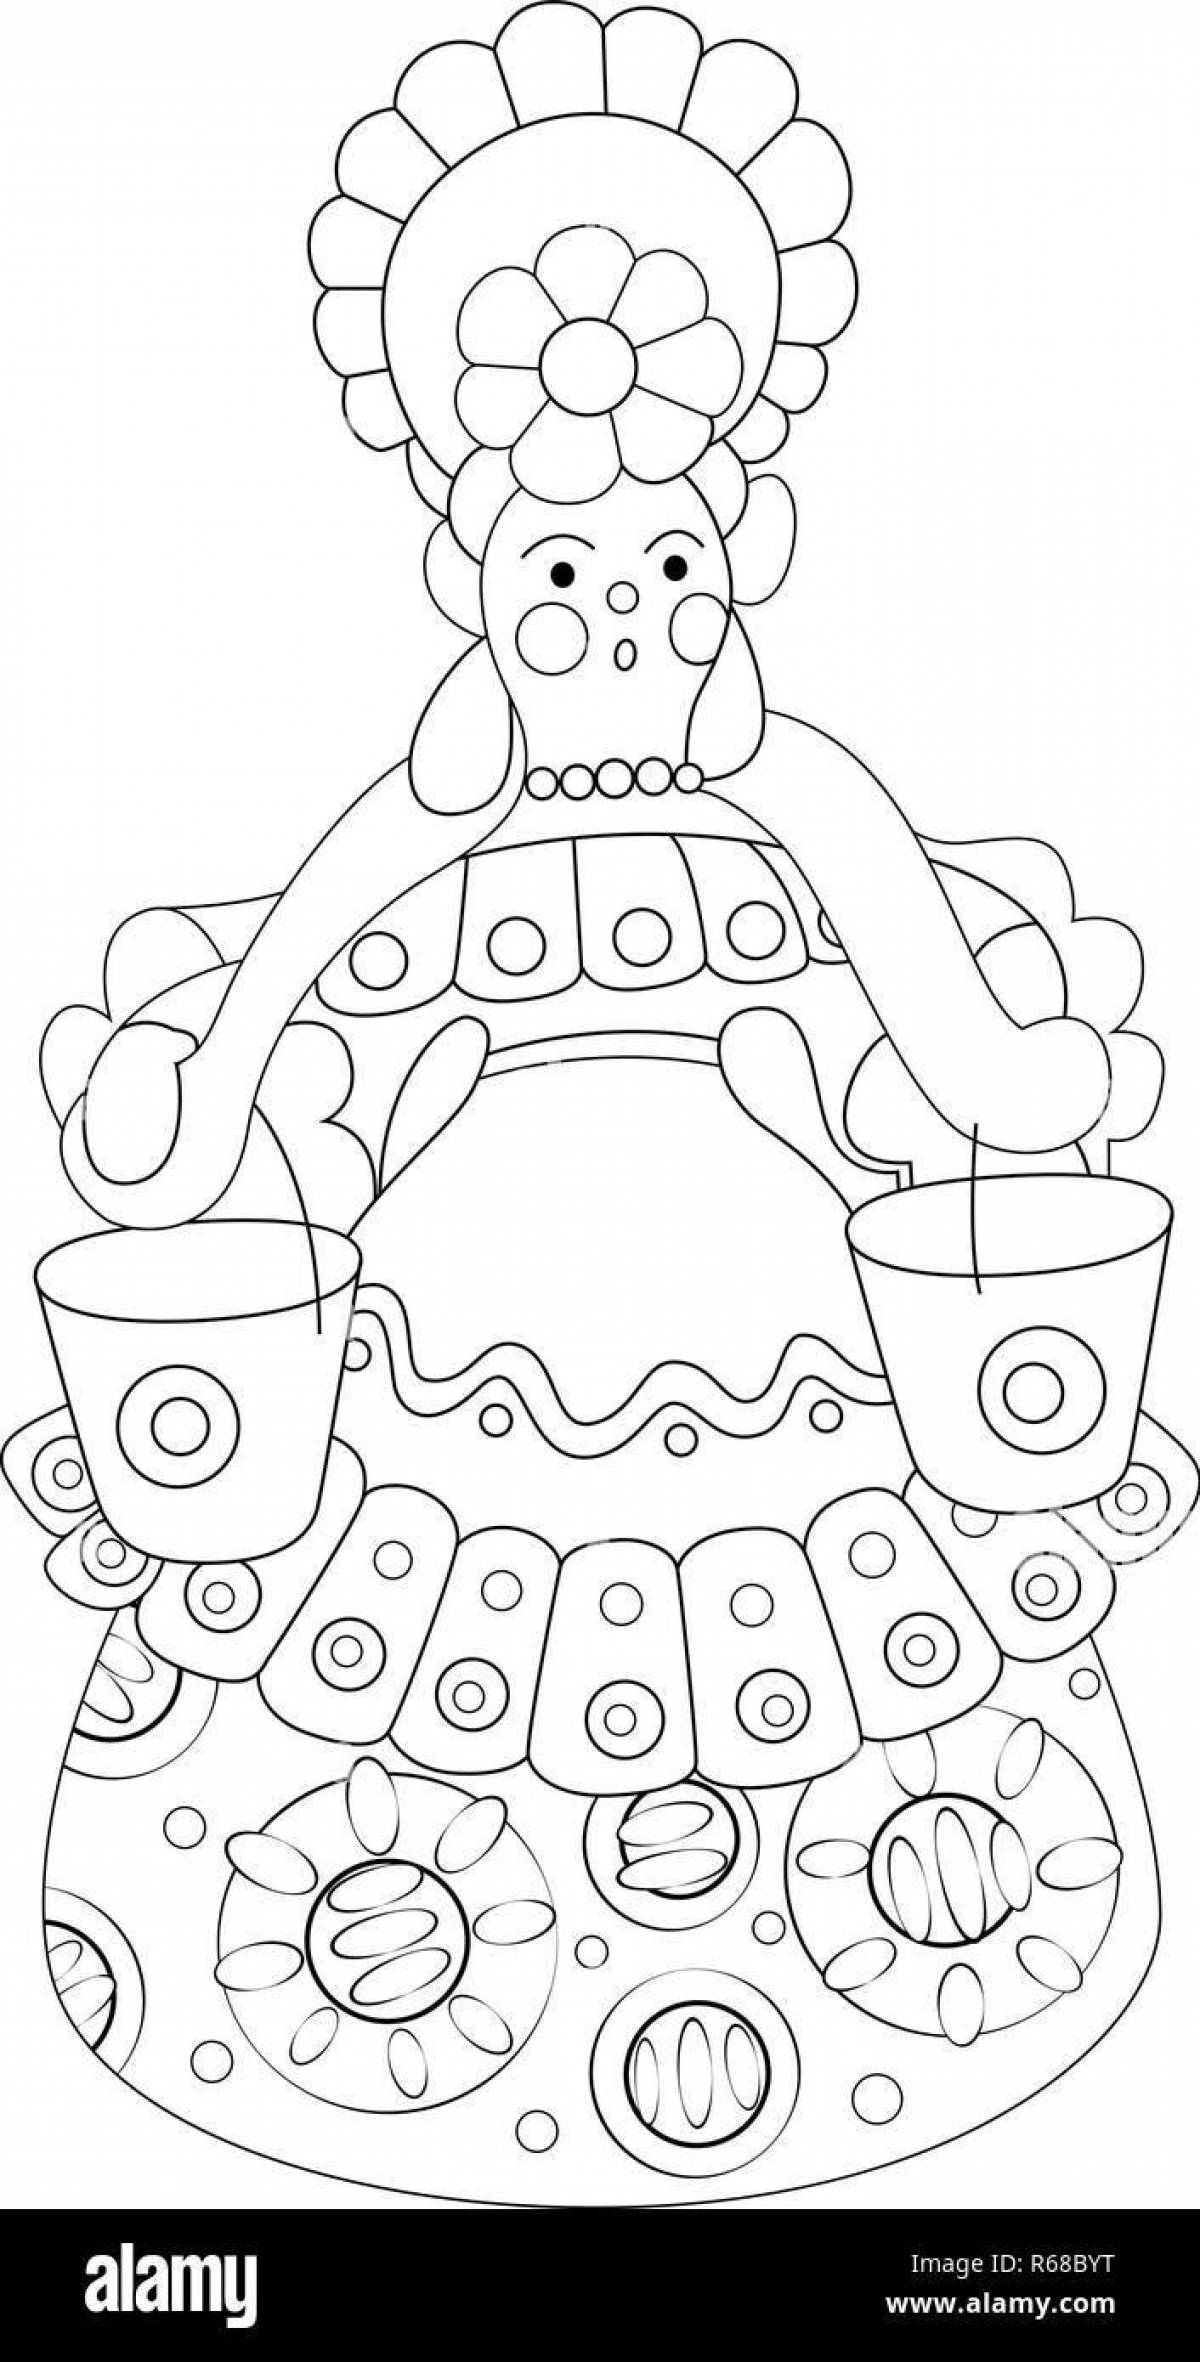 Coloring page charming Dymkovo doll